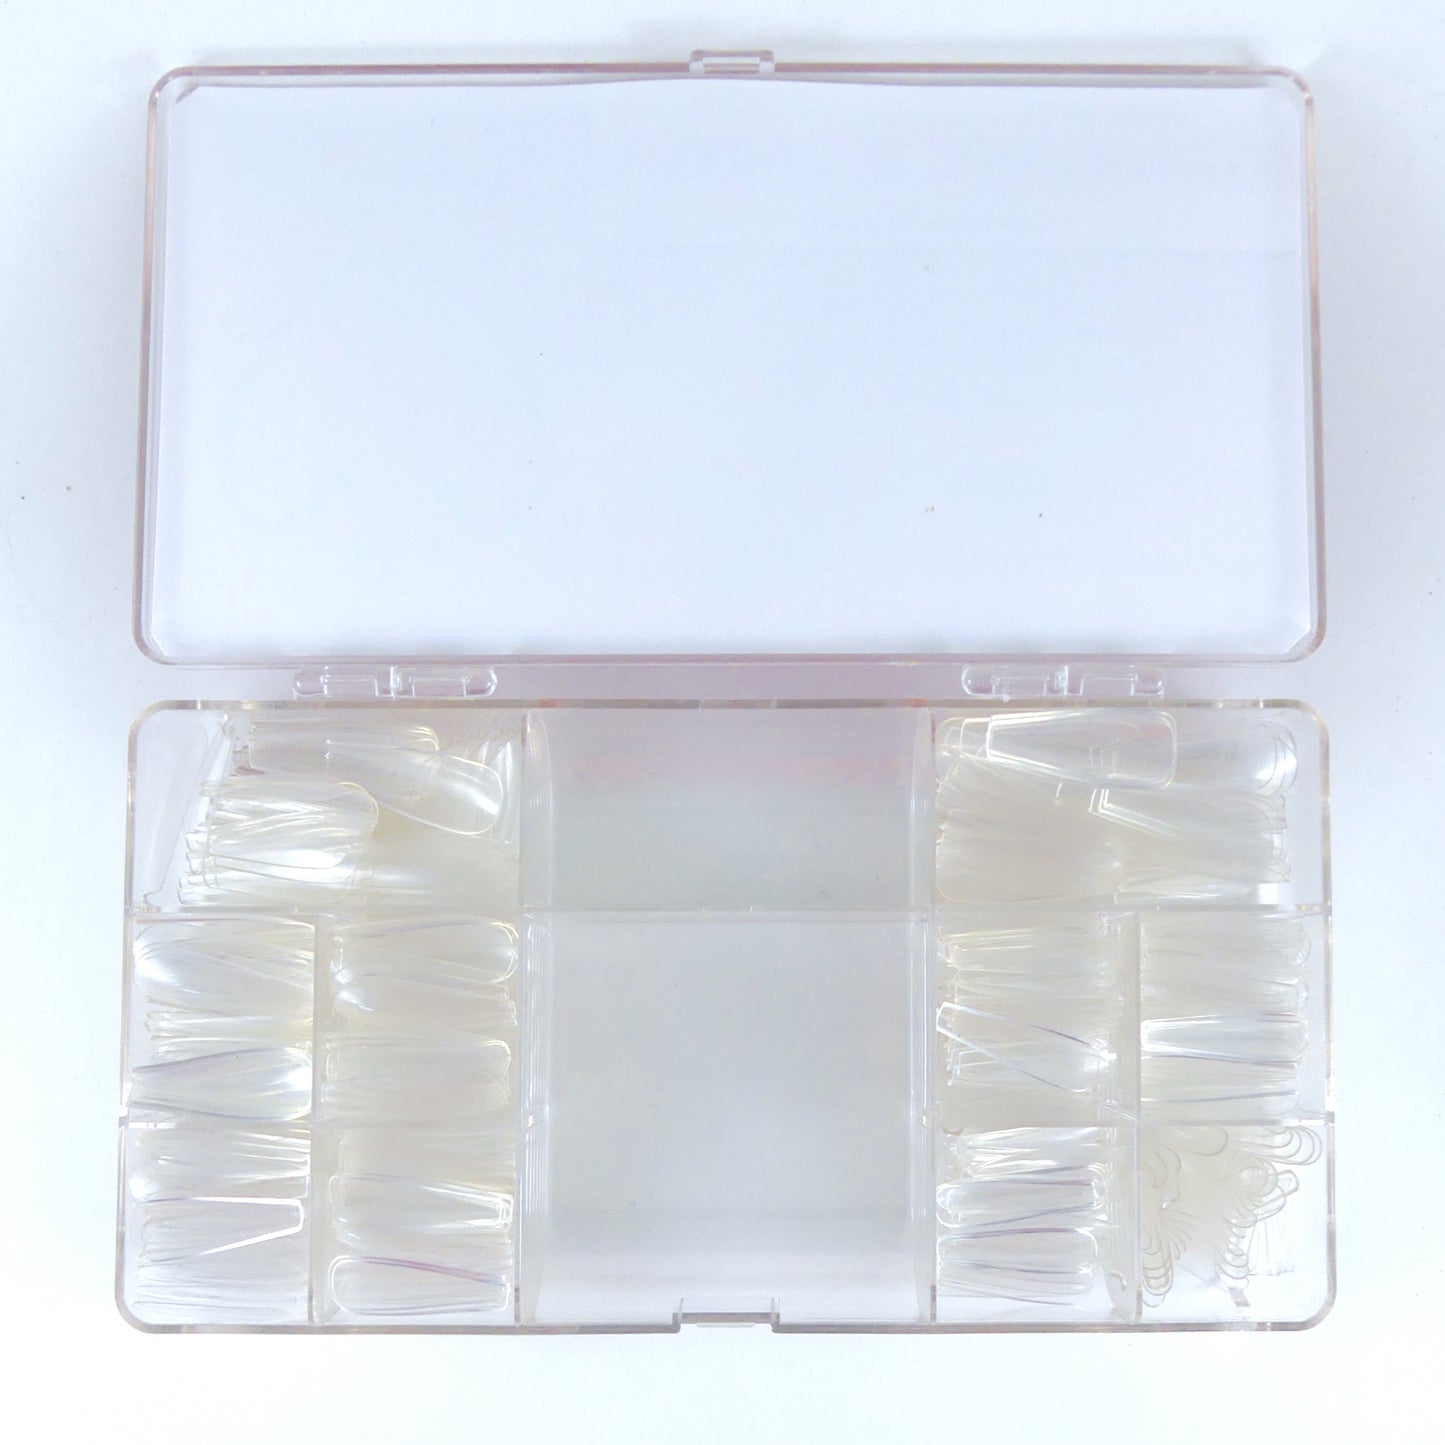 Coffin Press On Clear Tips, 500ct / 10 sizes - My Little Nail Art Shop